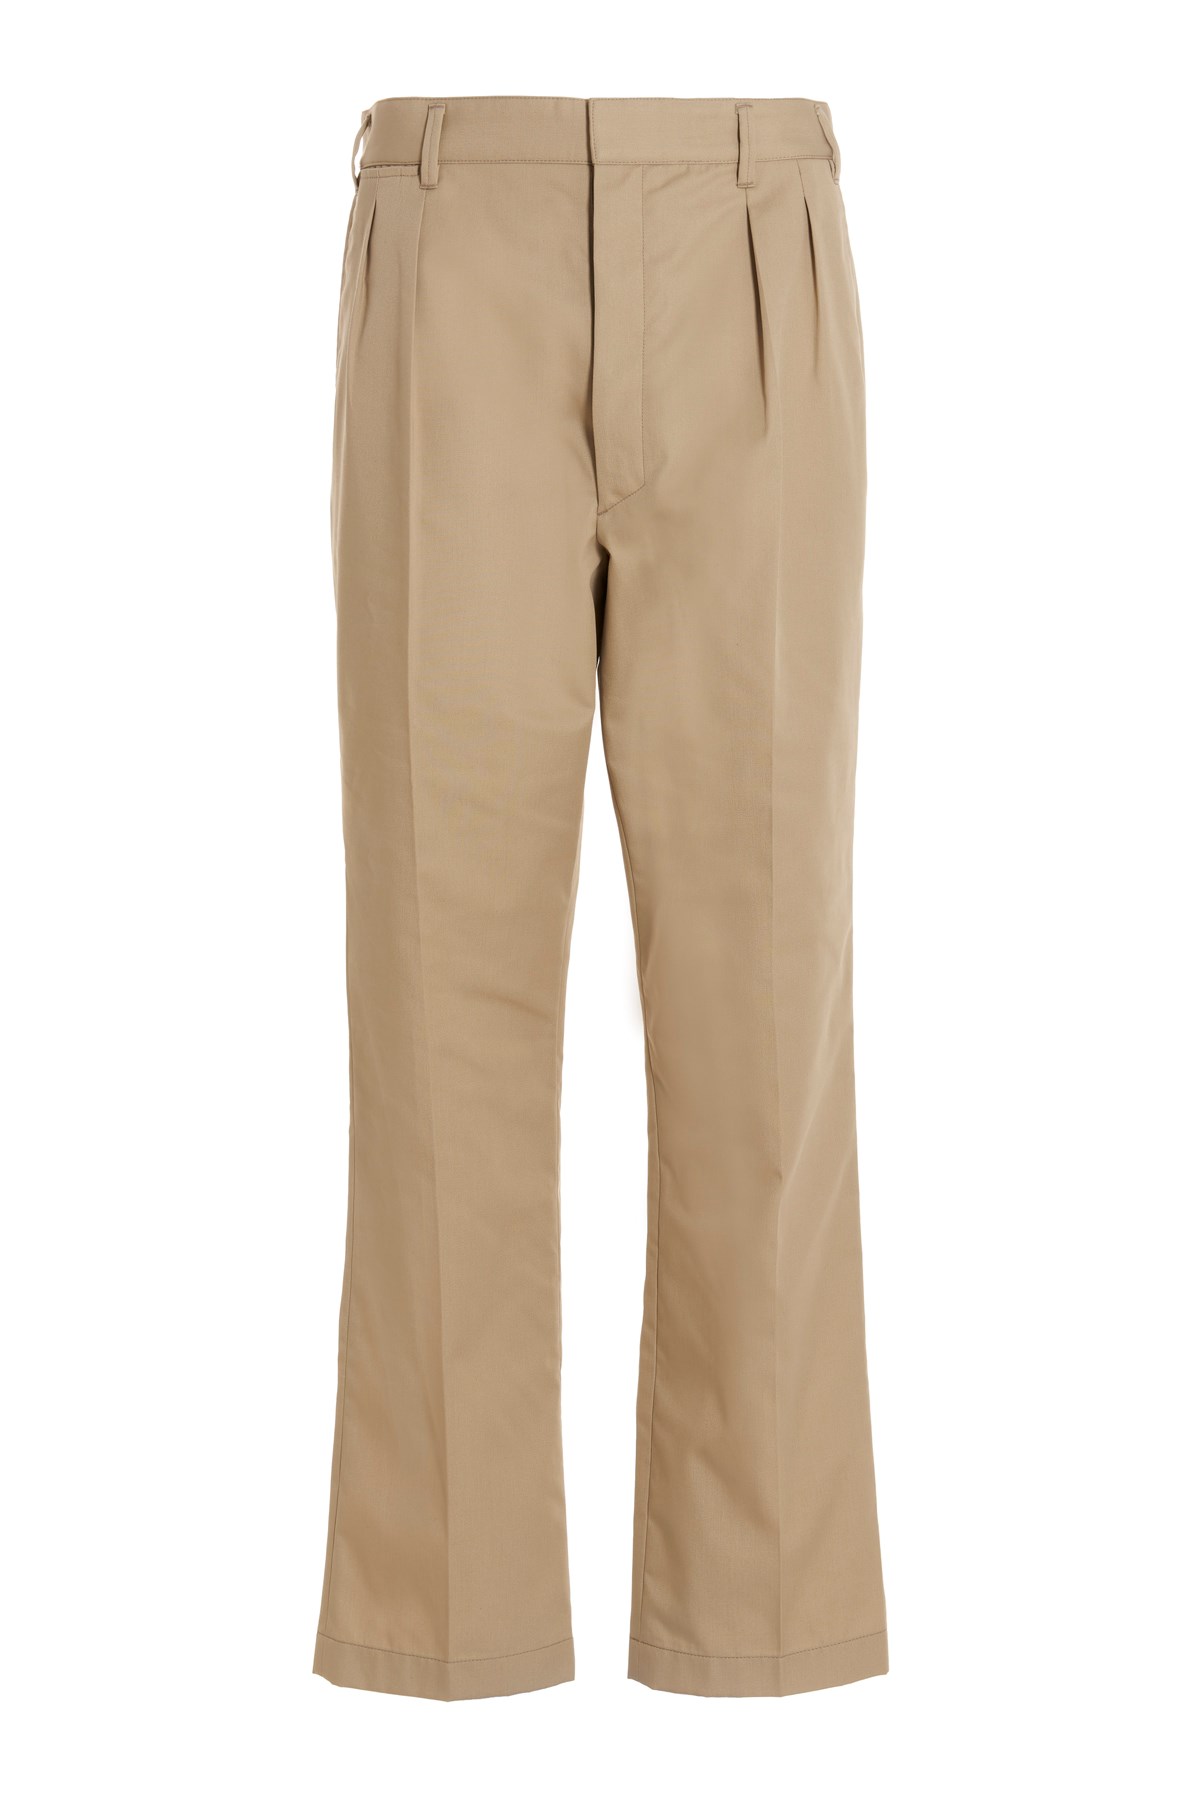 LEMAIRE 'Officer’ Trousers